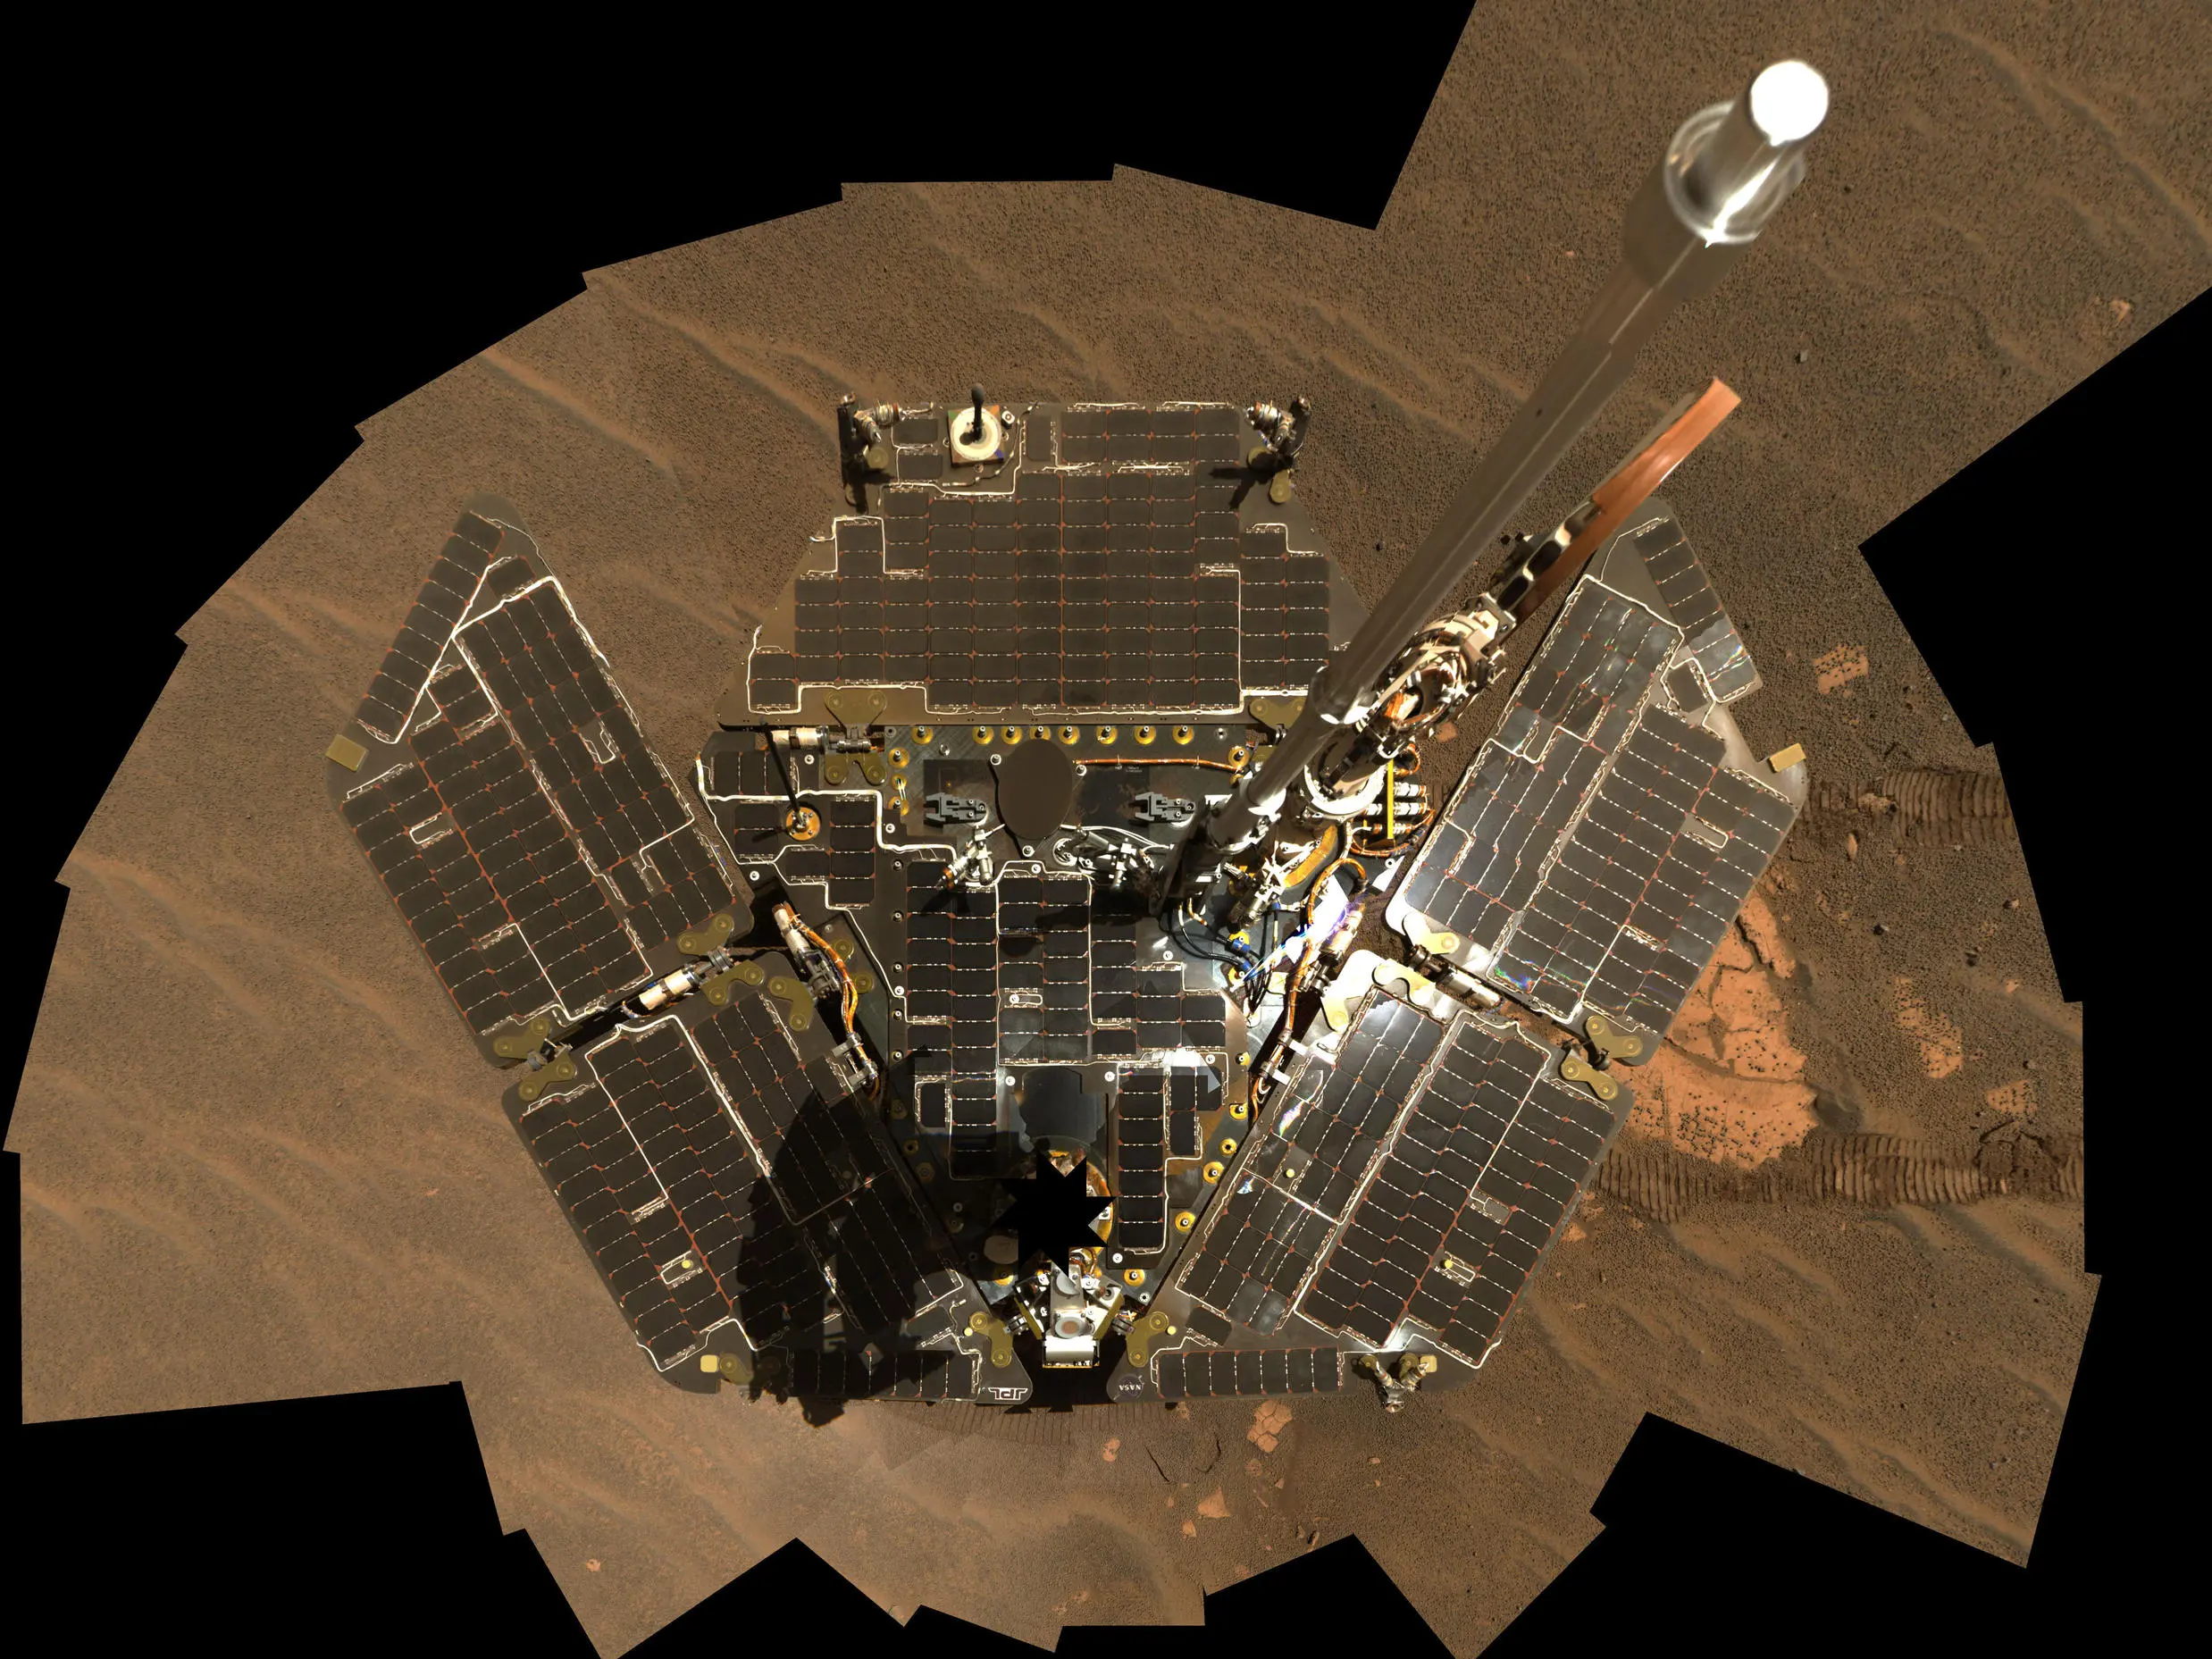 curiosity rover solar panels expansion - What is the lifespan of the power supply in Curiosity rover